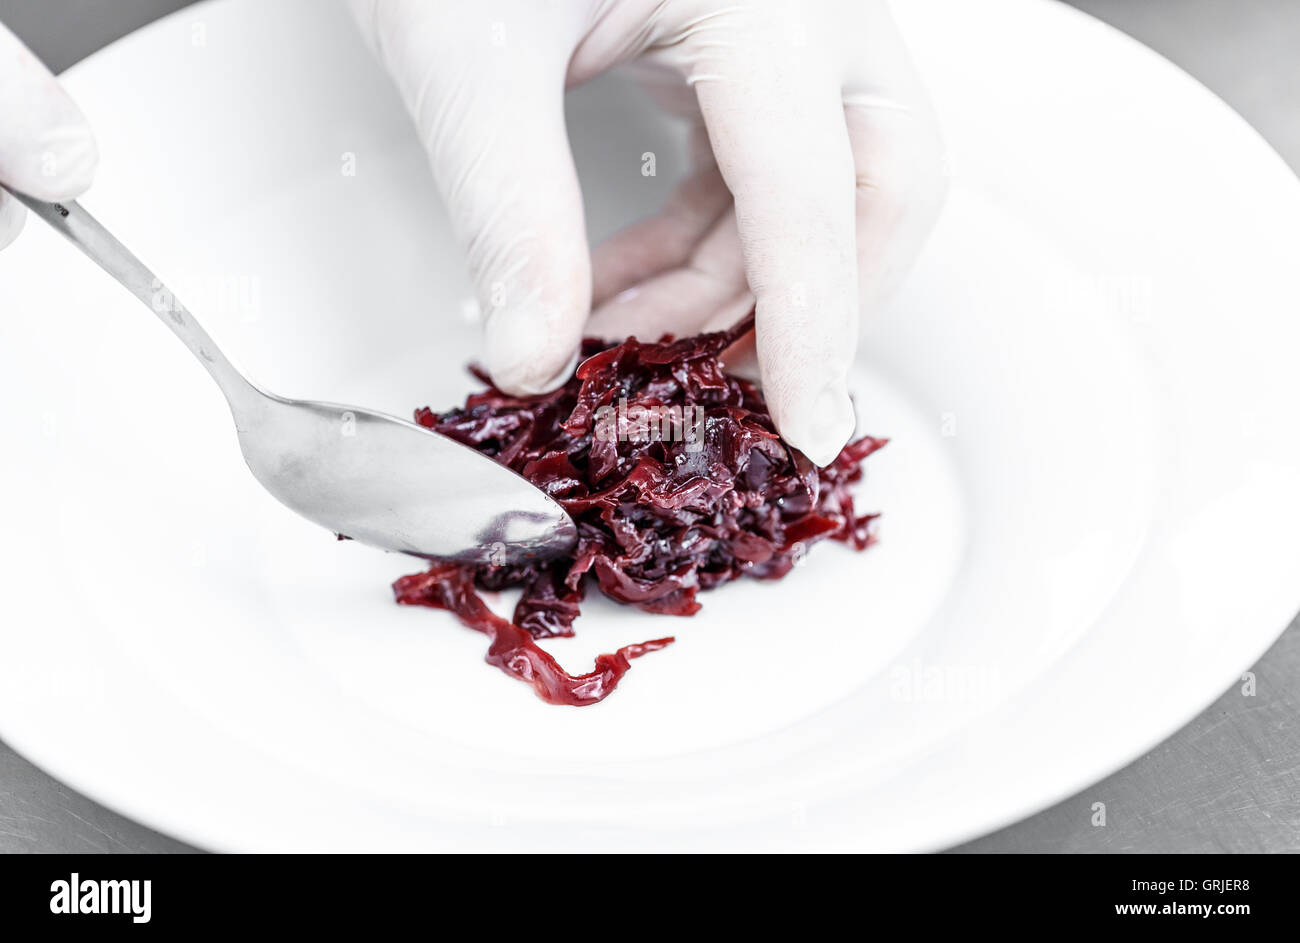 Chef serving spicy red cabbage on white plate Stock Photo